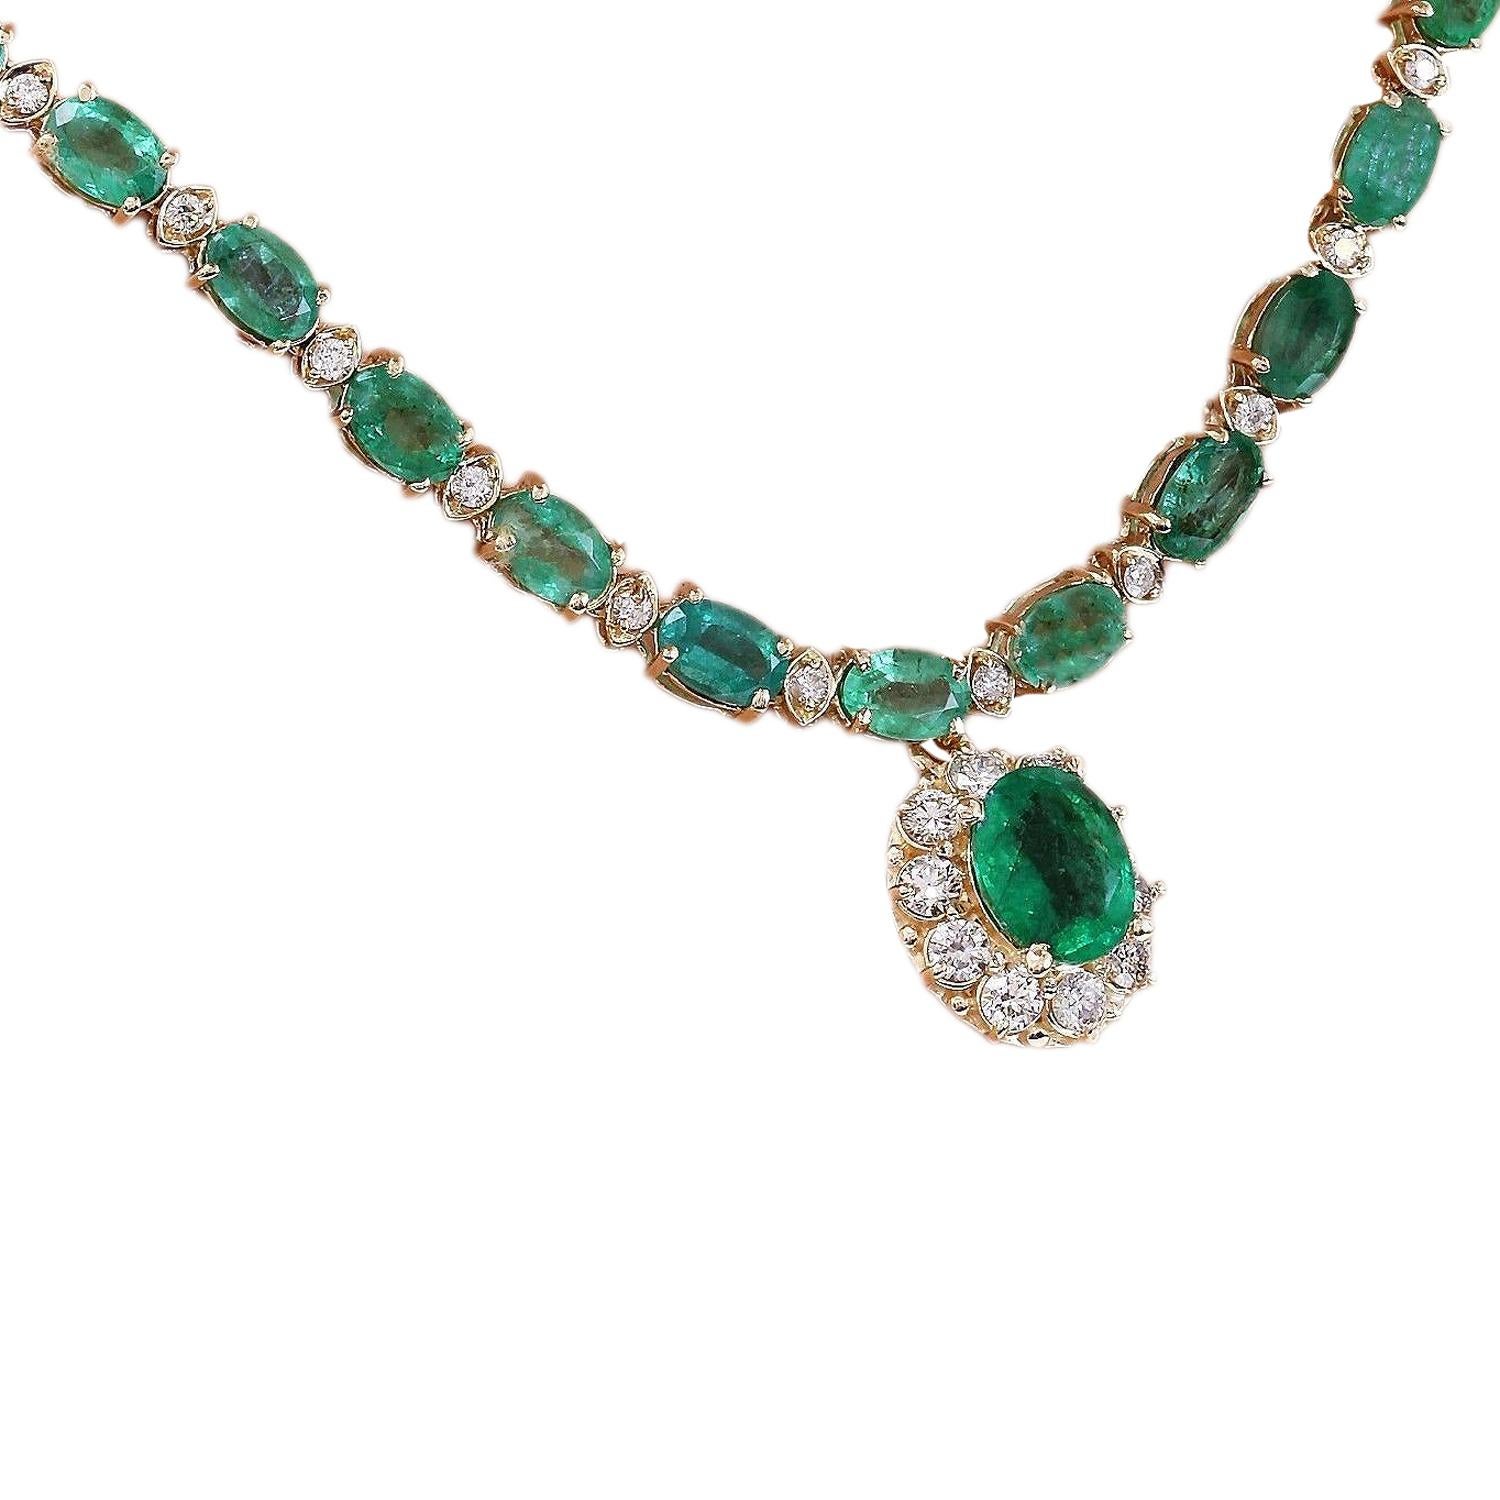 29.75 Carat Natural Emerald 14K Solid Yellow Gold Diamond Necklace
Item Type: Necklace
Item Style: Tennis
Item Length: 17 Inches
Material: 14K Yellow Gold
Mainstone: Emerald
Stone Color: Green
Center Stone Weight: 1.70 Caratn (9.00x7.00 mm)
Other